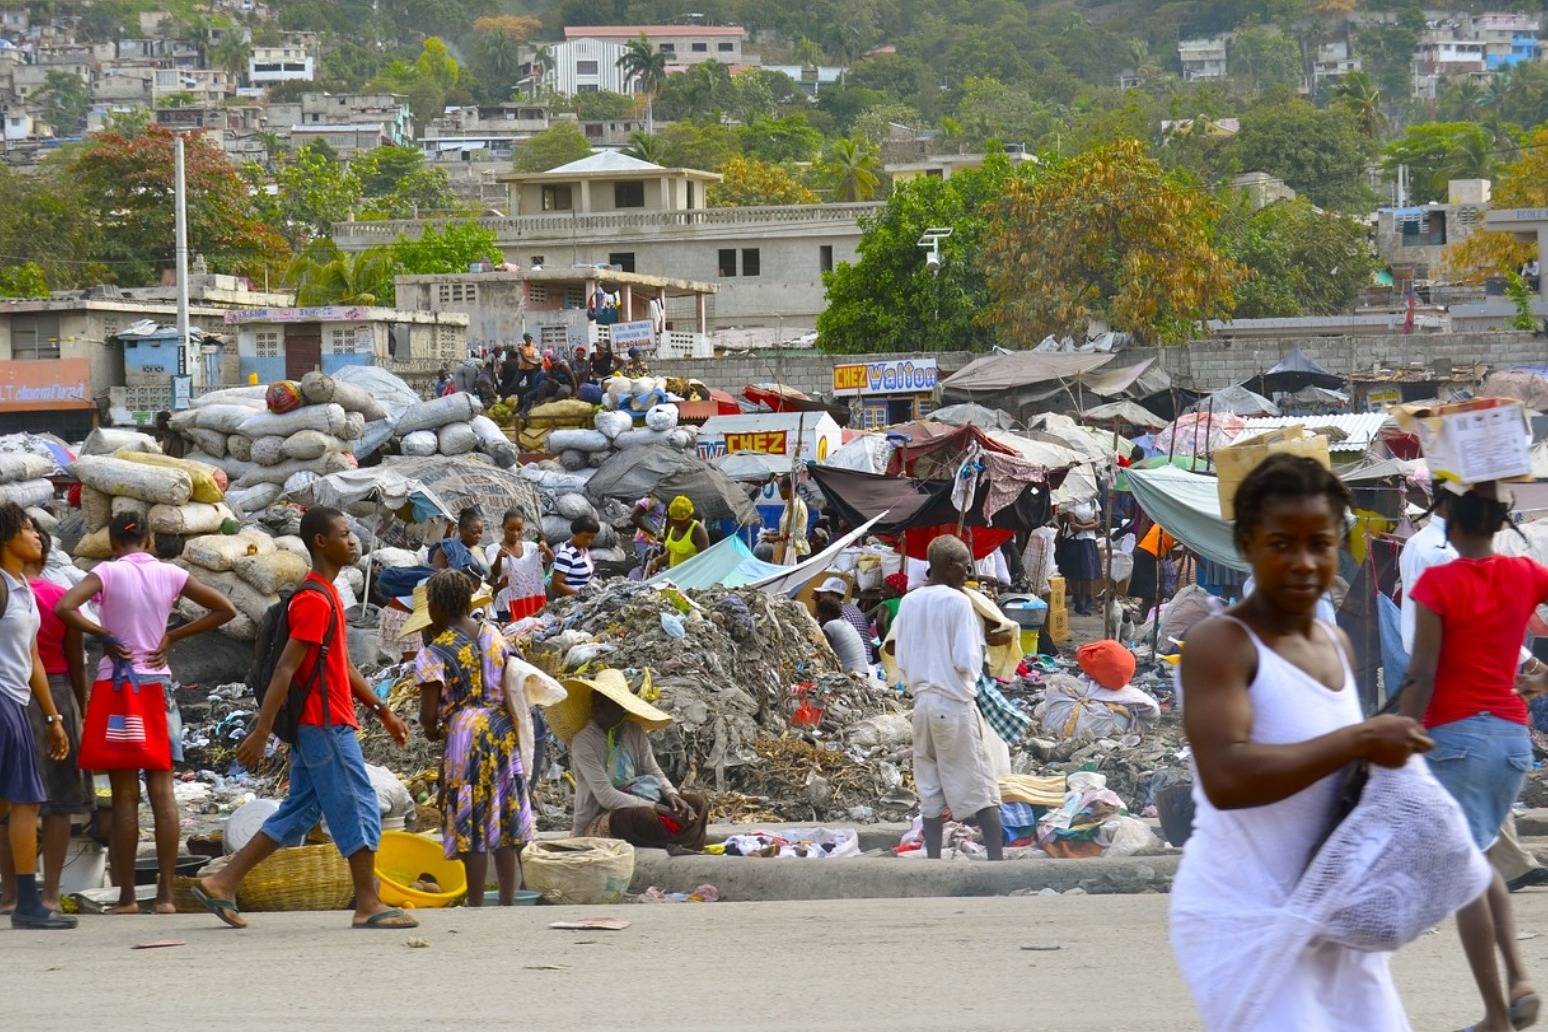 Oxfam publishes 2011 report into allegations made in Haiti 